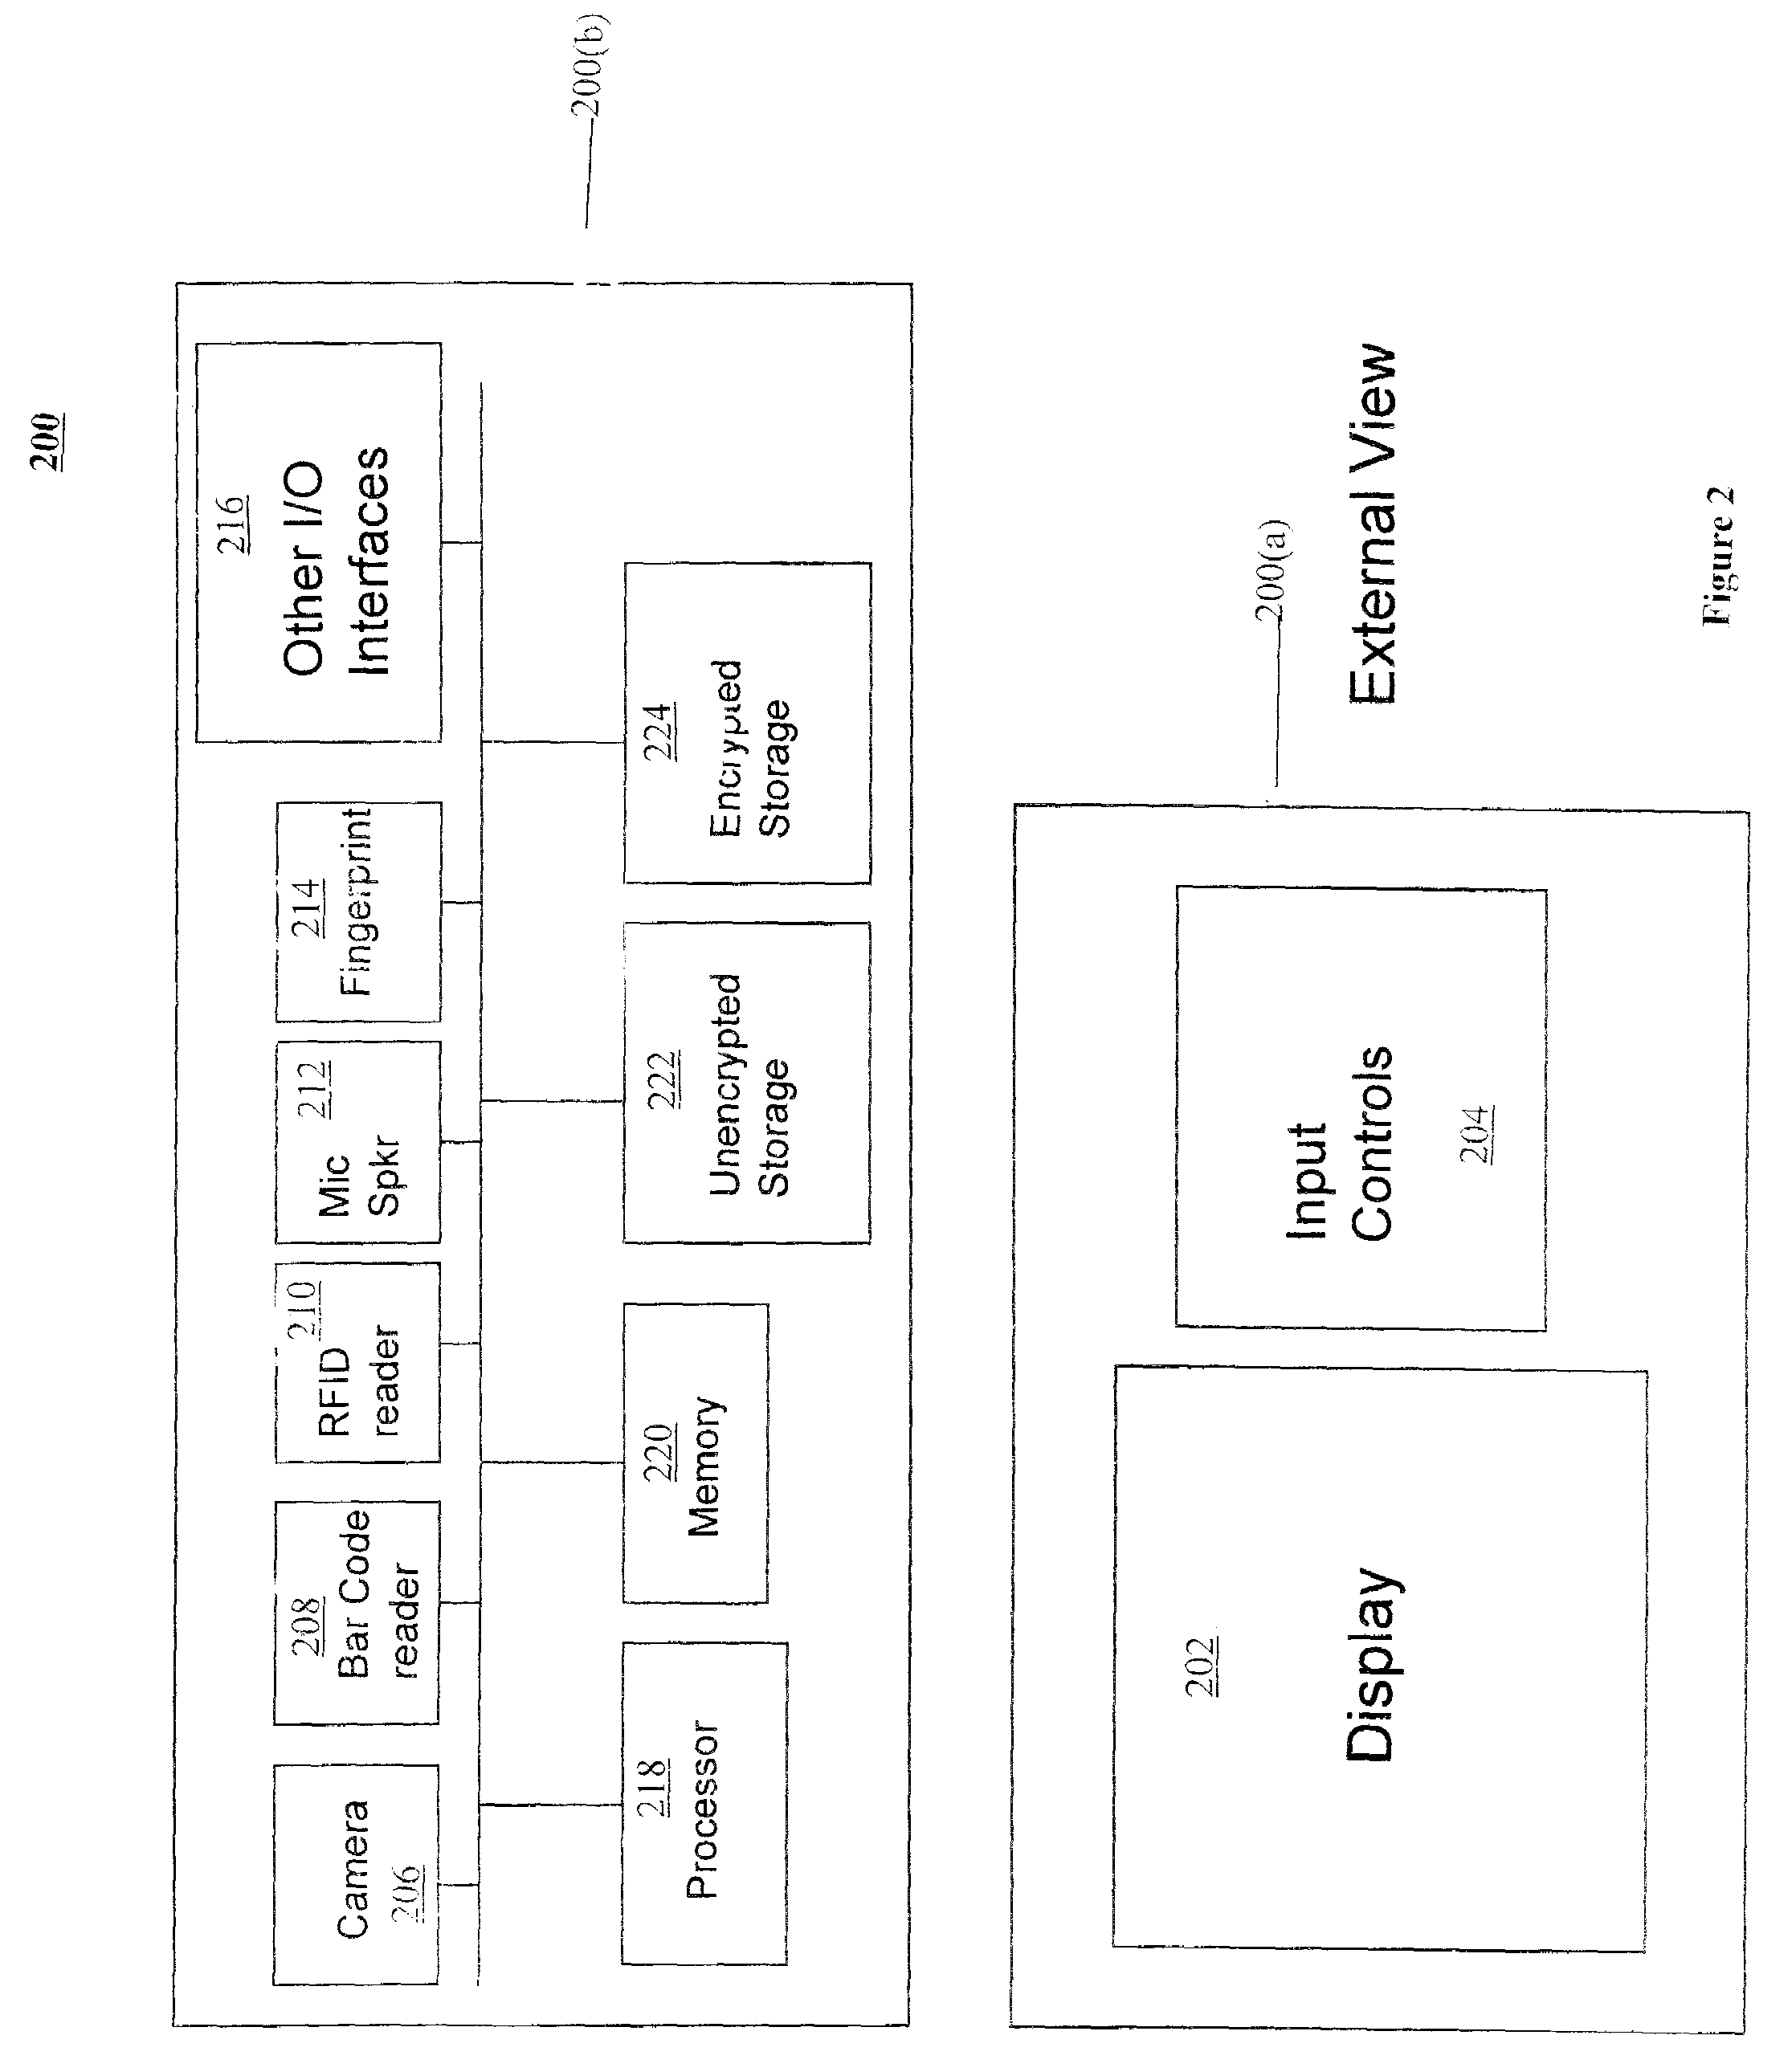 Method of creating password schemes for devices